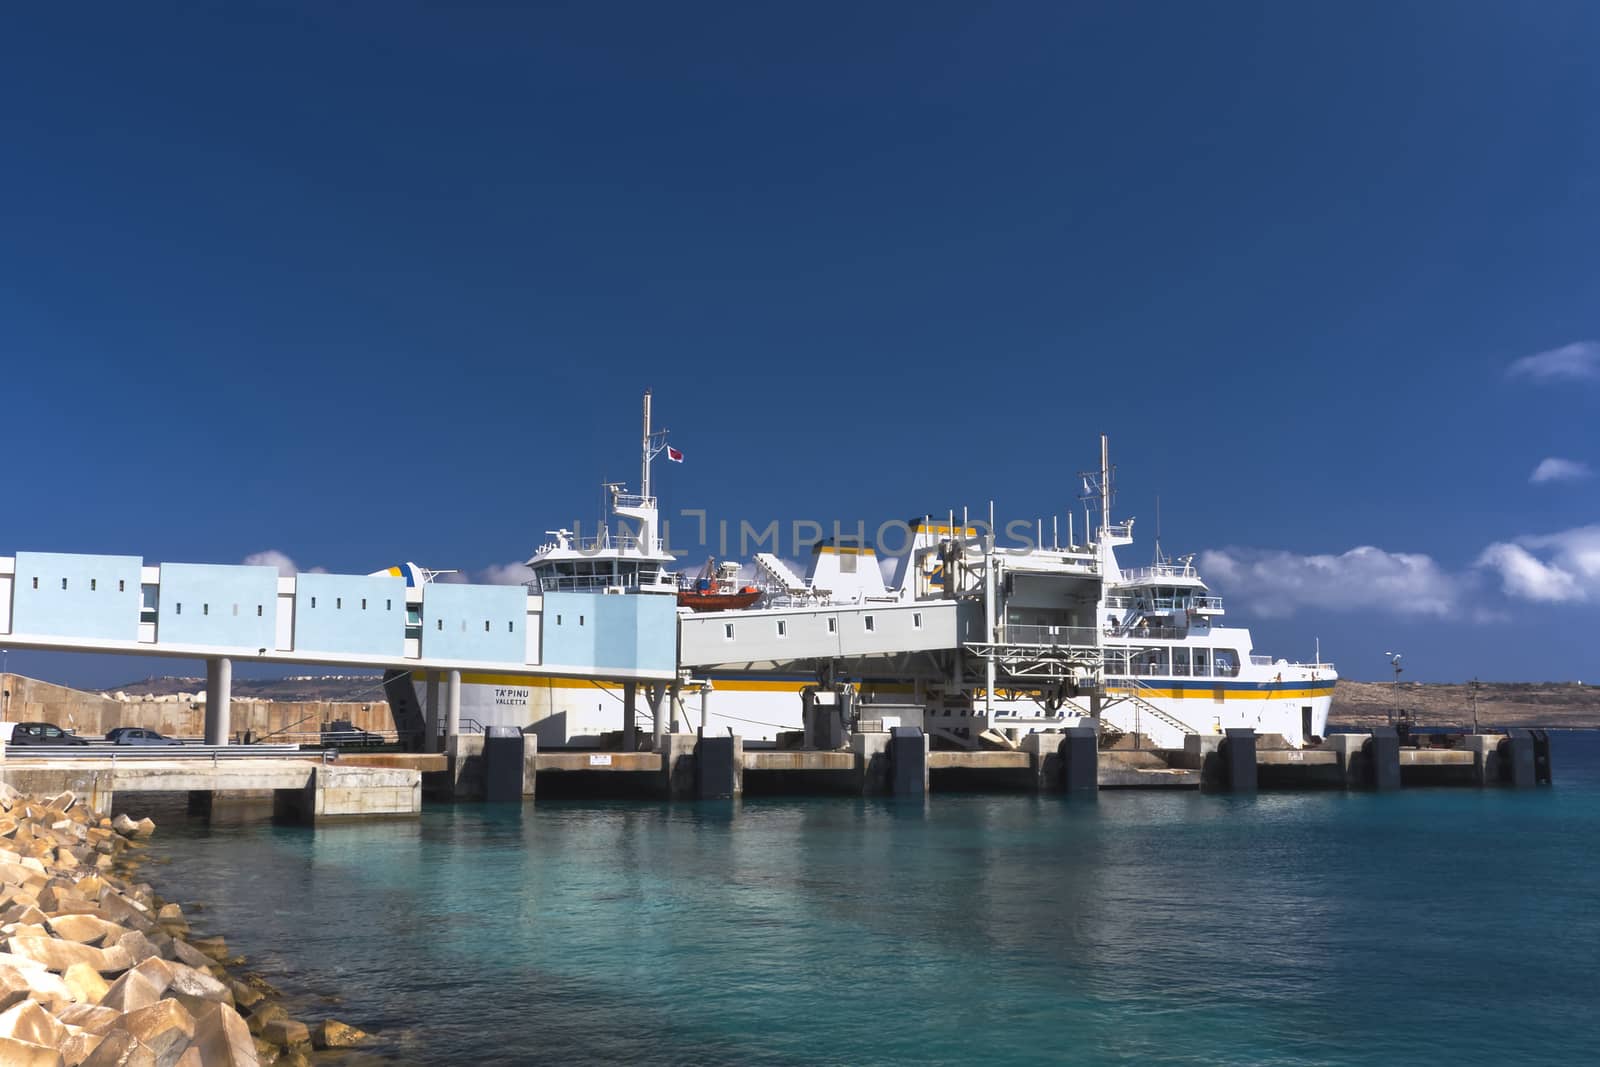 Infrastructure of the car and passenger ferry terminal in the small port in the north-western part of the country - Cirkewwa, Malta.